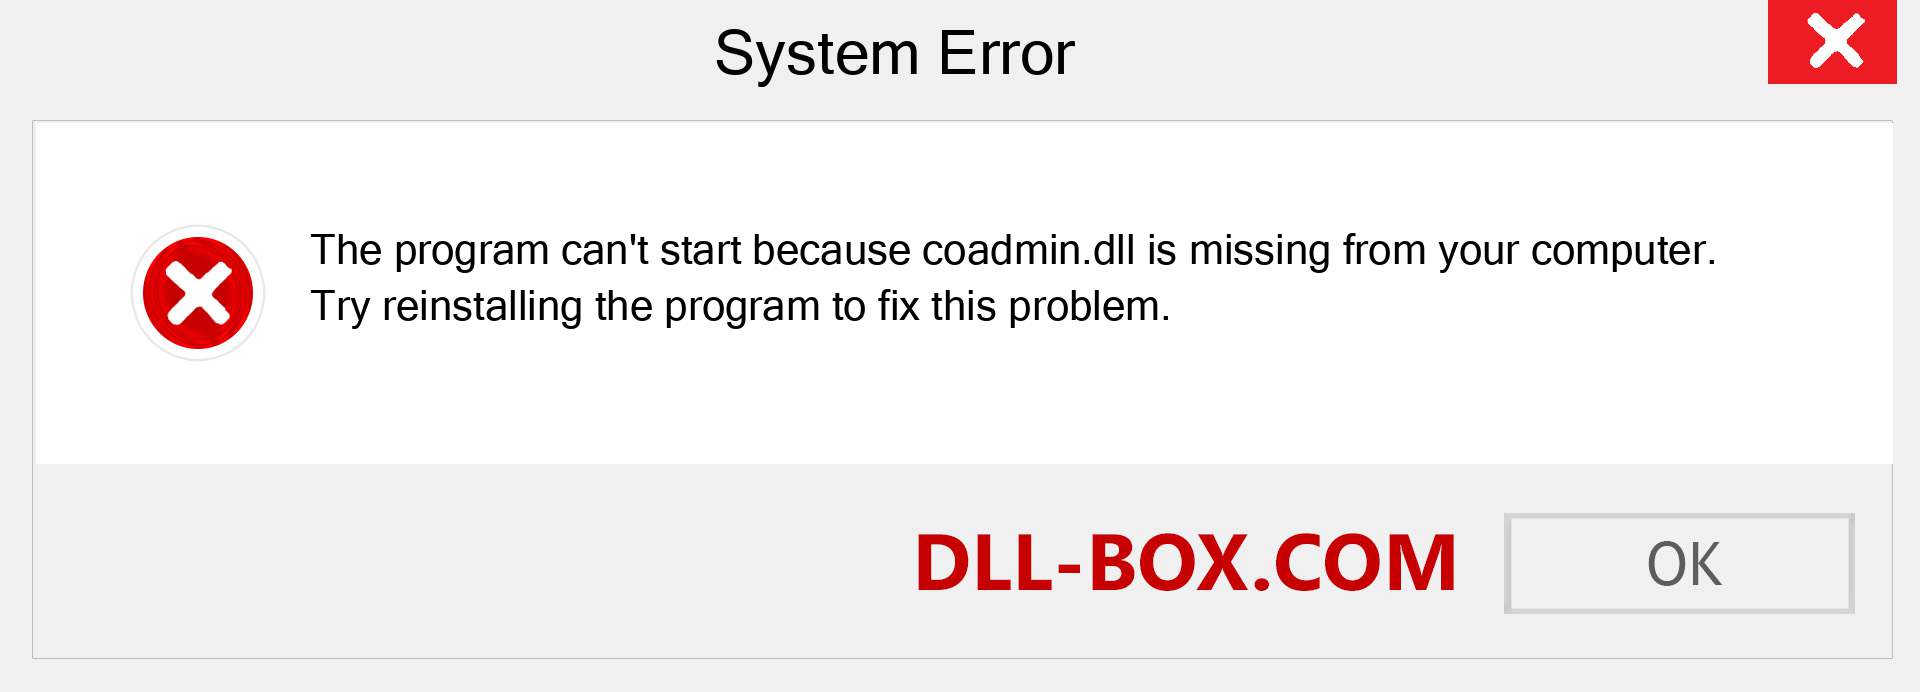  coadmin.dll file is missing?. Download for Windows 7, 8, 10 - Fix  coadmin dll Missing Error on Windows, photos, images